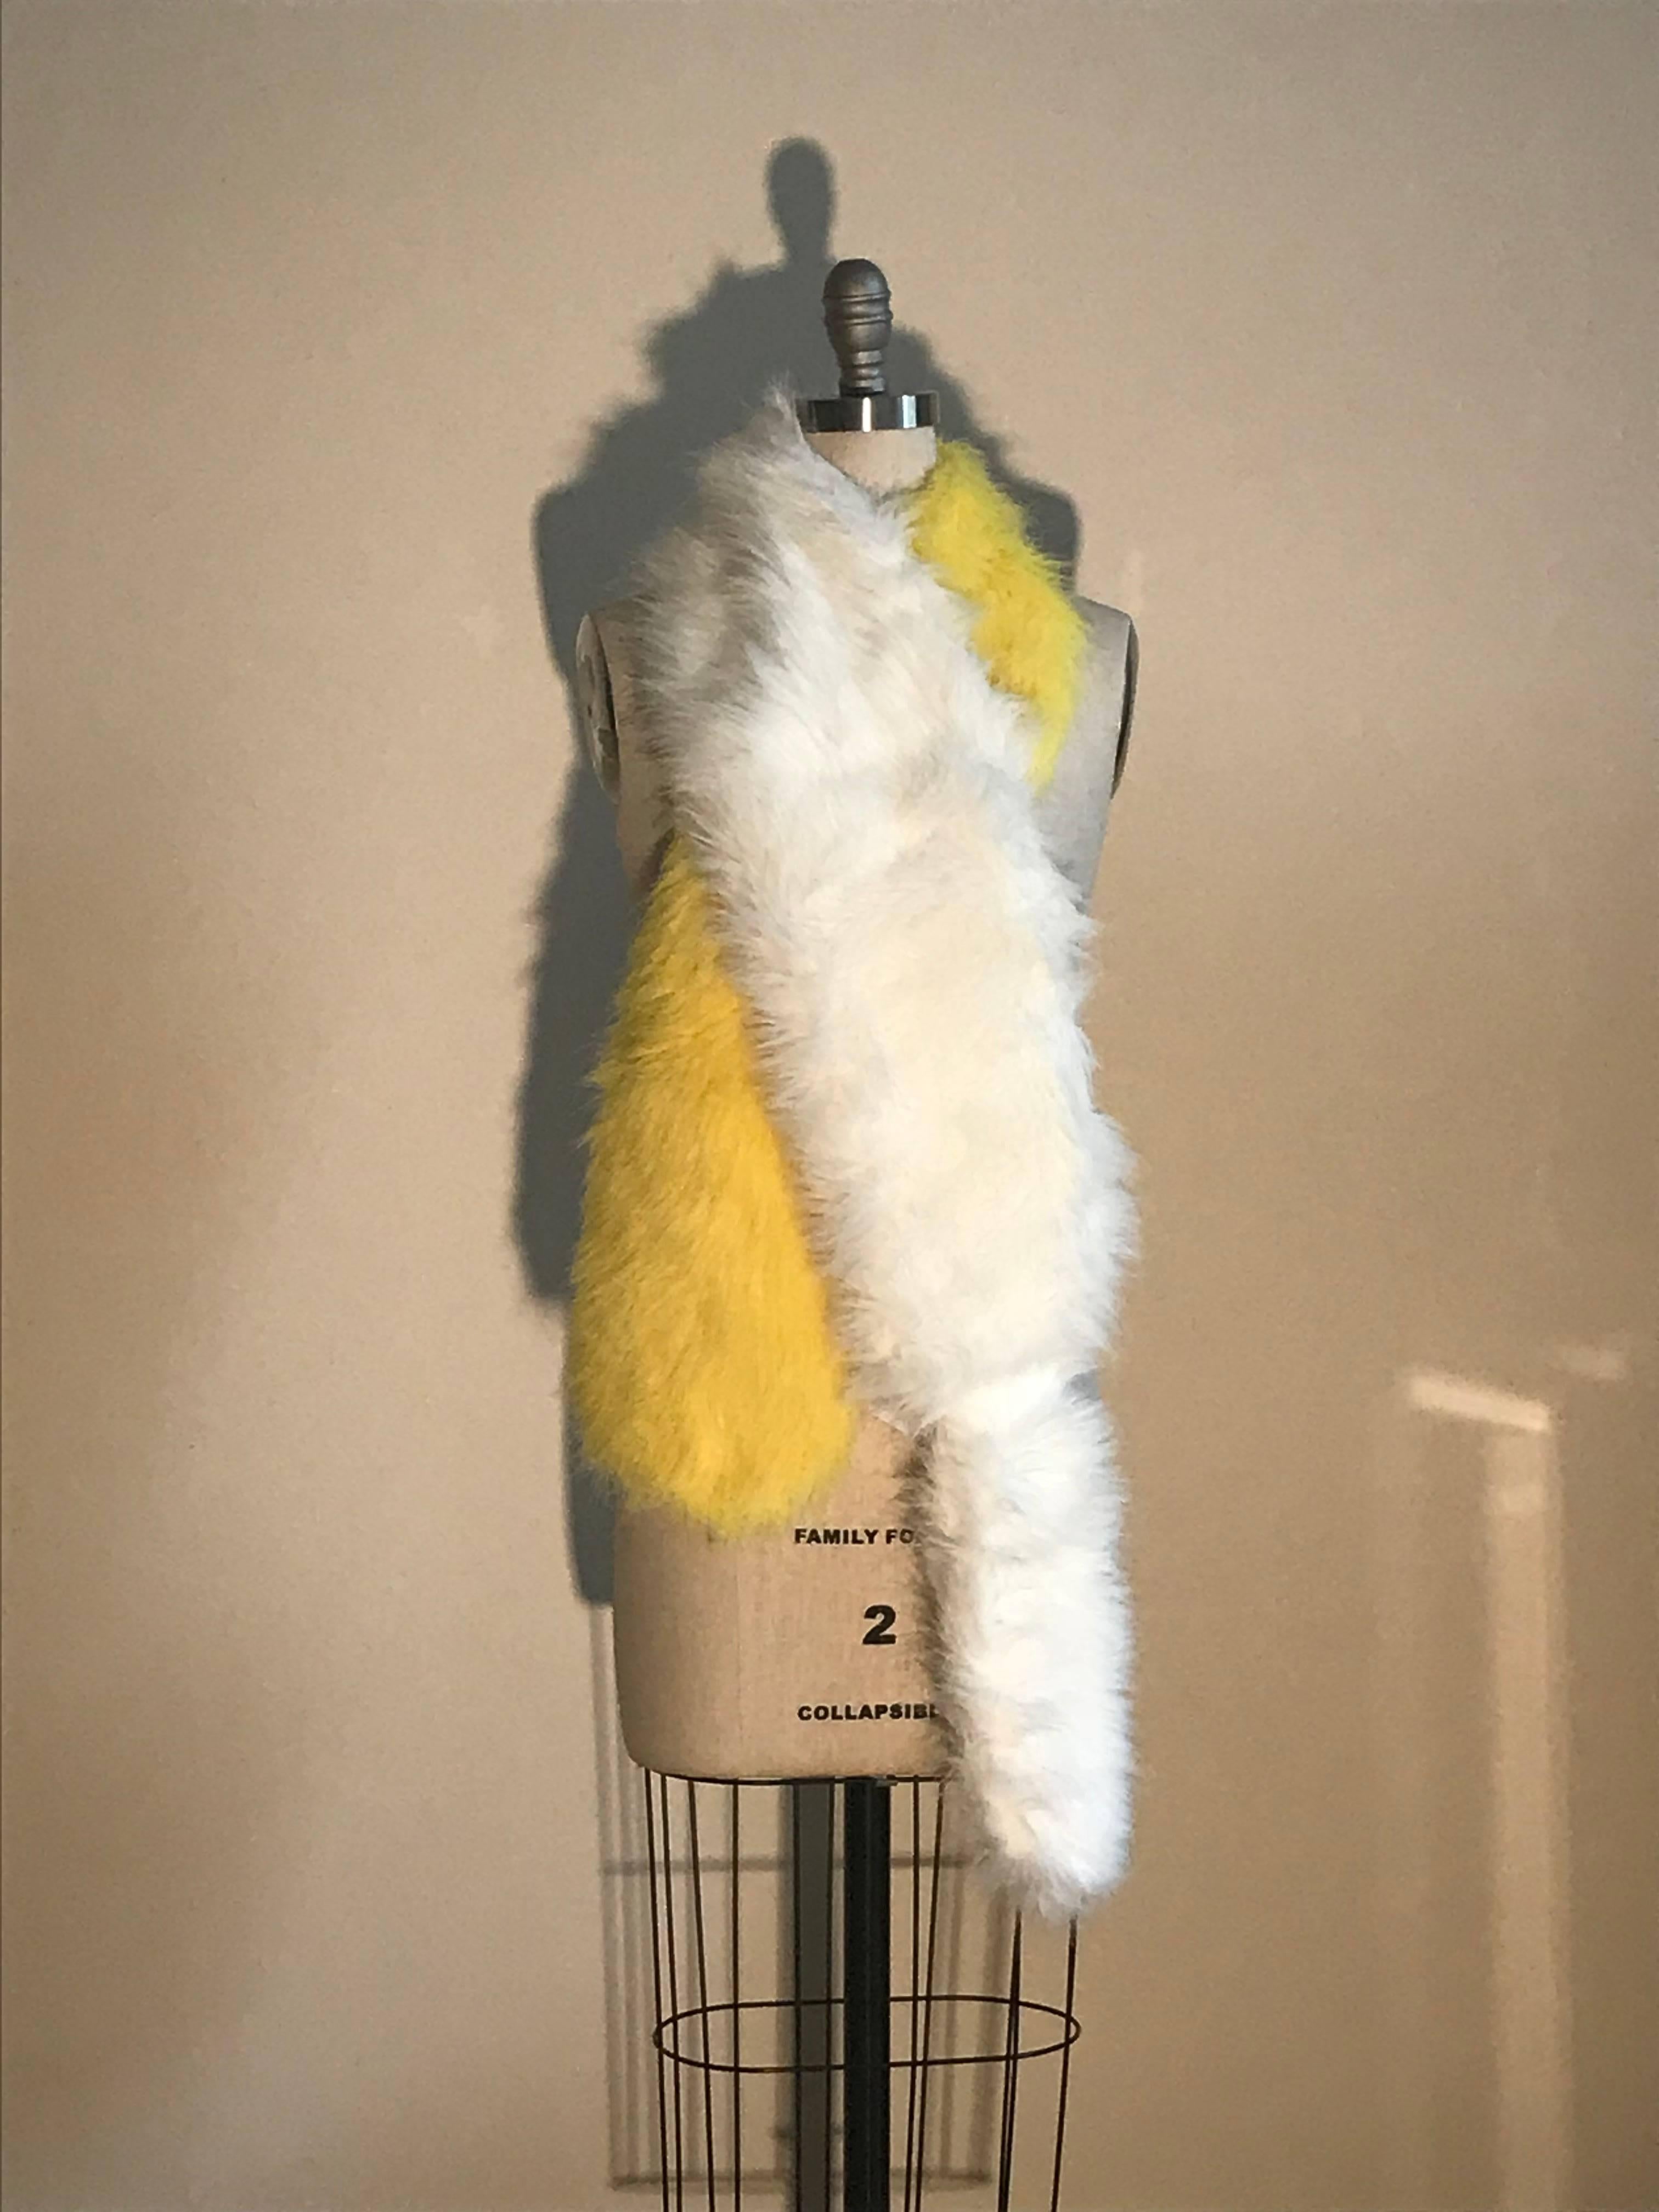 Prada yellow and white faux fur stole, as seen in the Spring Summer 2011 ad campaign and runway. Wear as is, or make it even more over the top by adding a cluster of pins or brooches. 

Made in Italy.

65% modacrylic, 35% acrylic on 100%